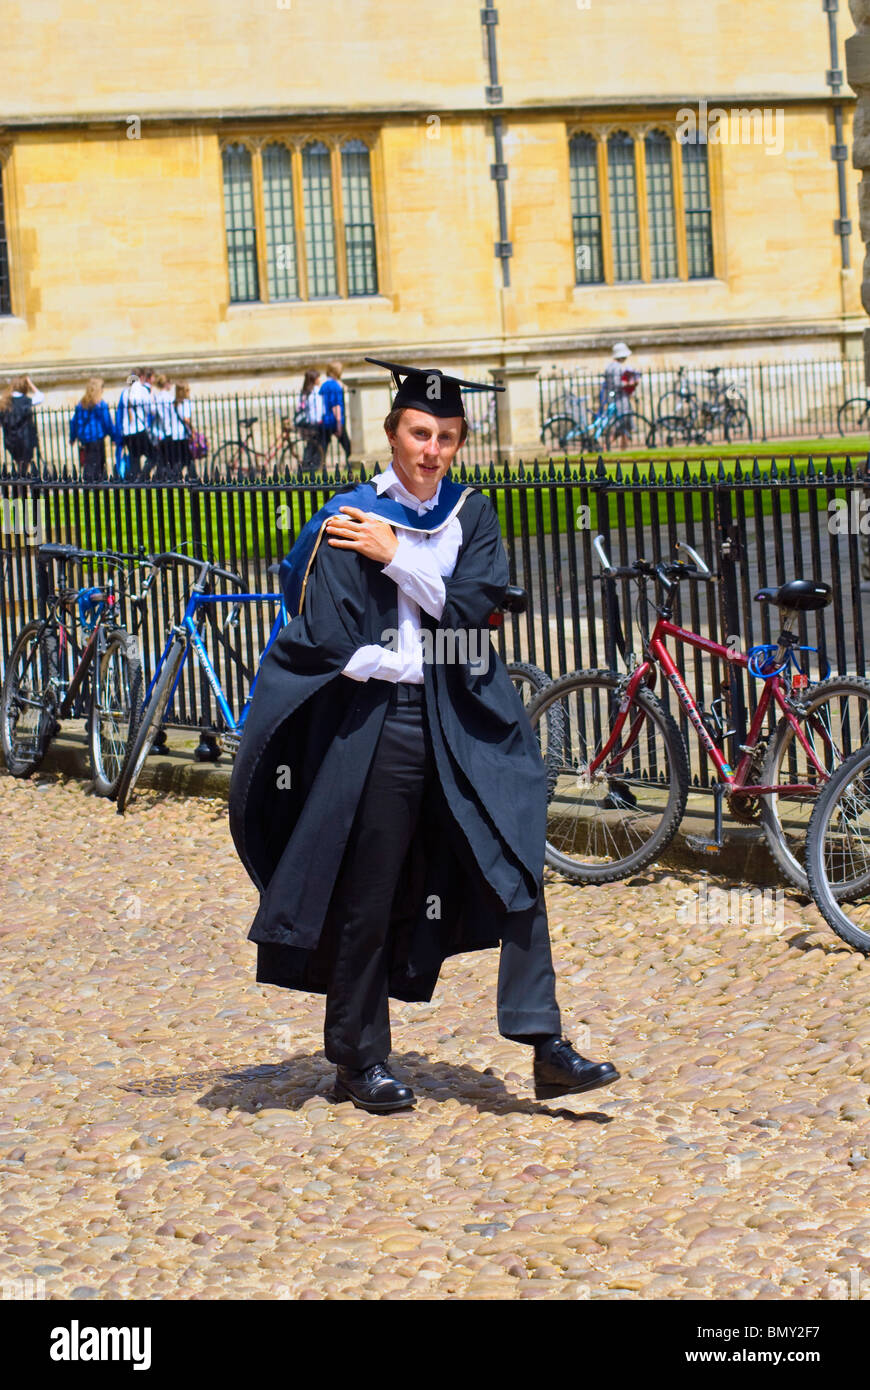 Oxford University student dressed in formal cape and gown Stock Photo